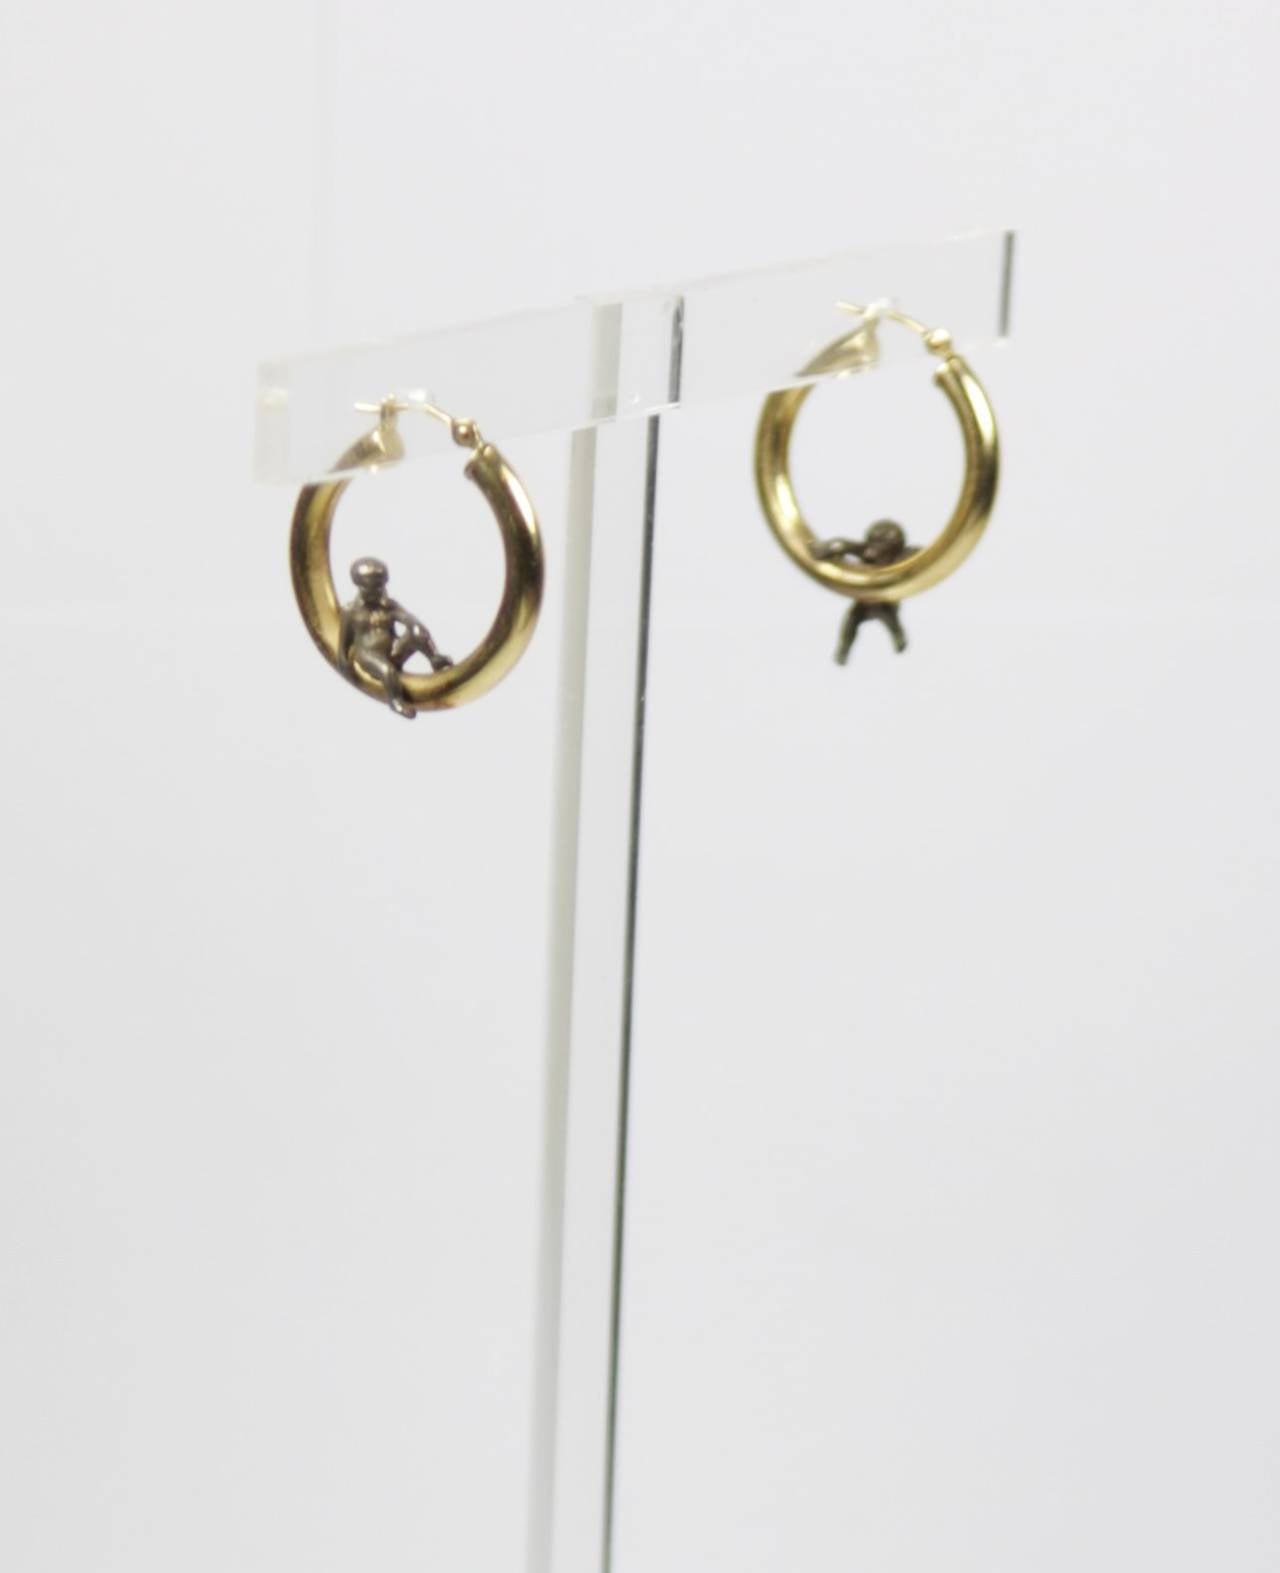 These 14kt Gold earrings are available through The Paper Bag Princess of Beverly Hills. Please feel free to contact us with any inquiries you may have. 

The earrings are composed of a 14KT yellow gold and features two angels set in the hoop